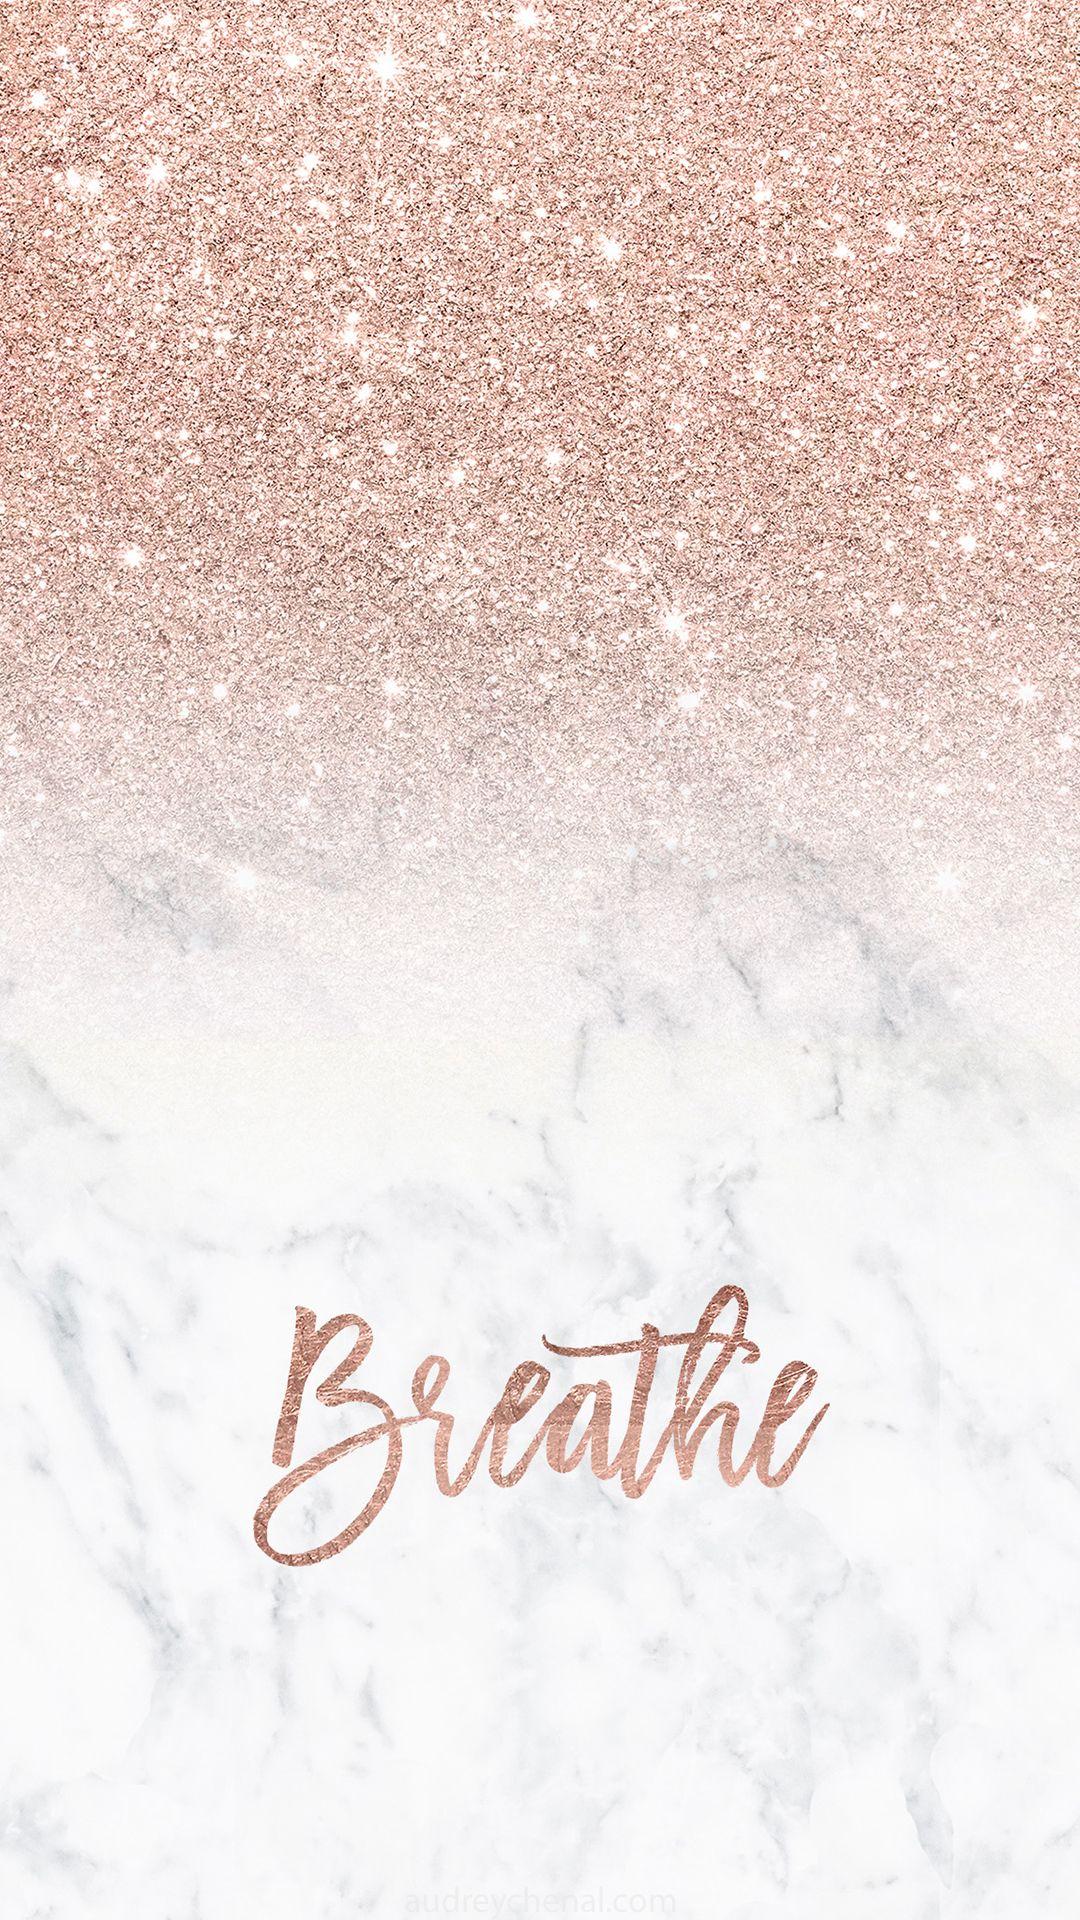 Rose Gold Simple Girly Wallpaper